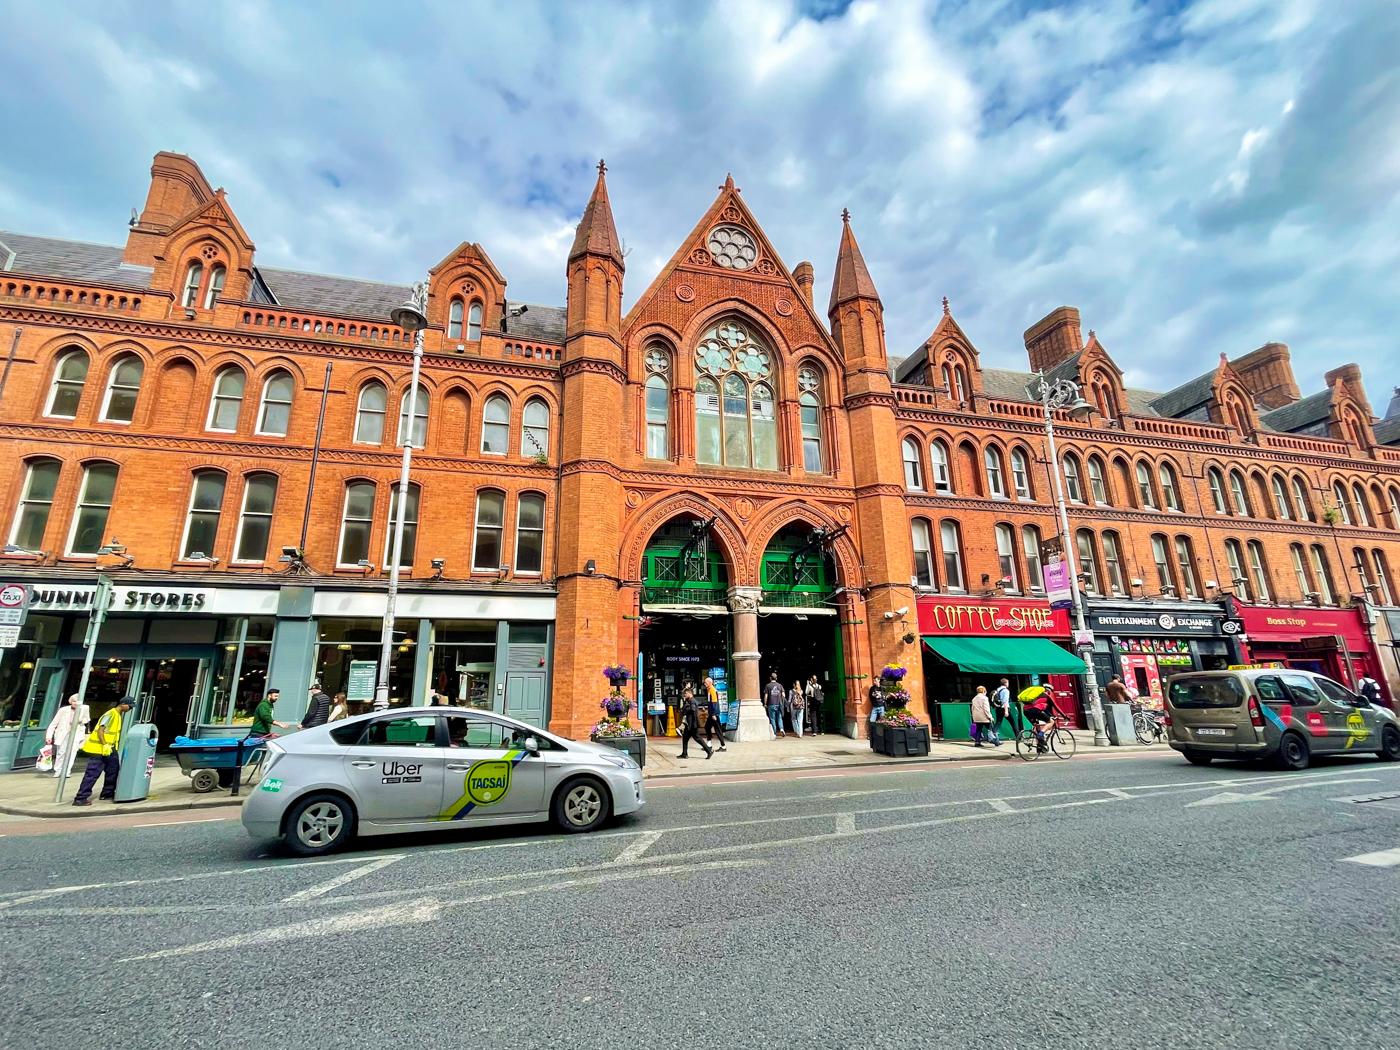 The rustic, brick design of George's Street Arcade looks imposing against the cloudy skies. In the foreground, several taxis drive along the otherwise-empty street.